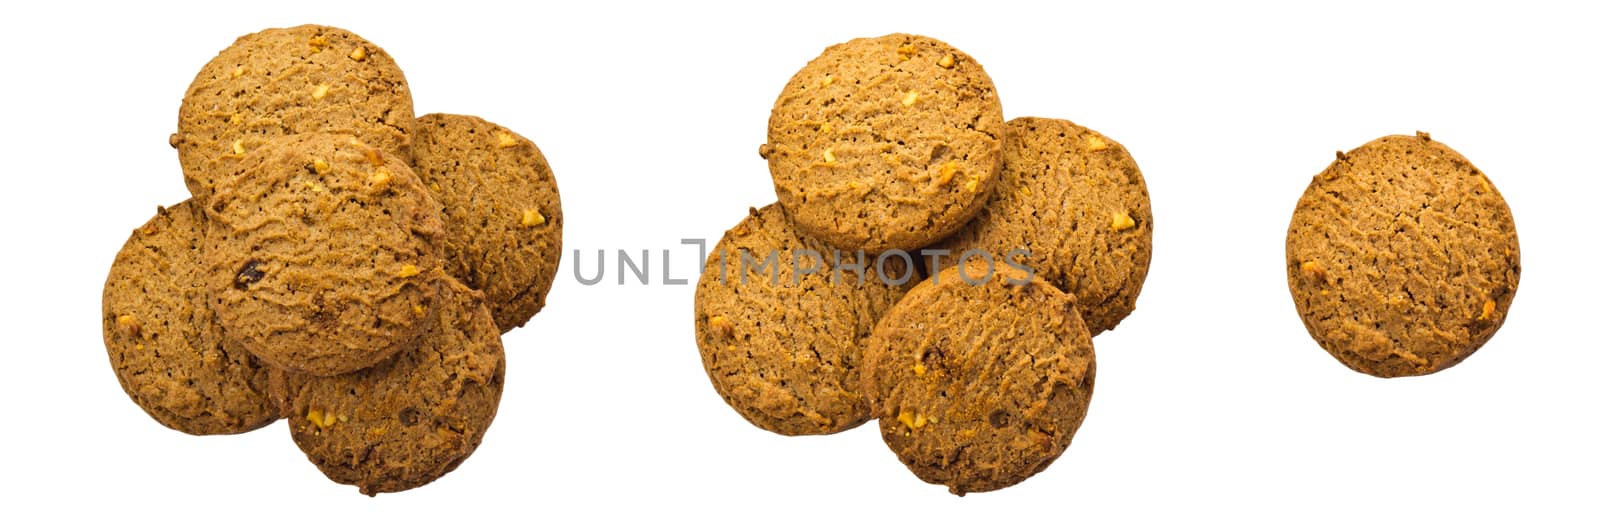 Chocolate cookies isolated on white background and clipping path